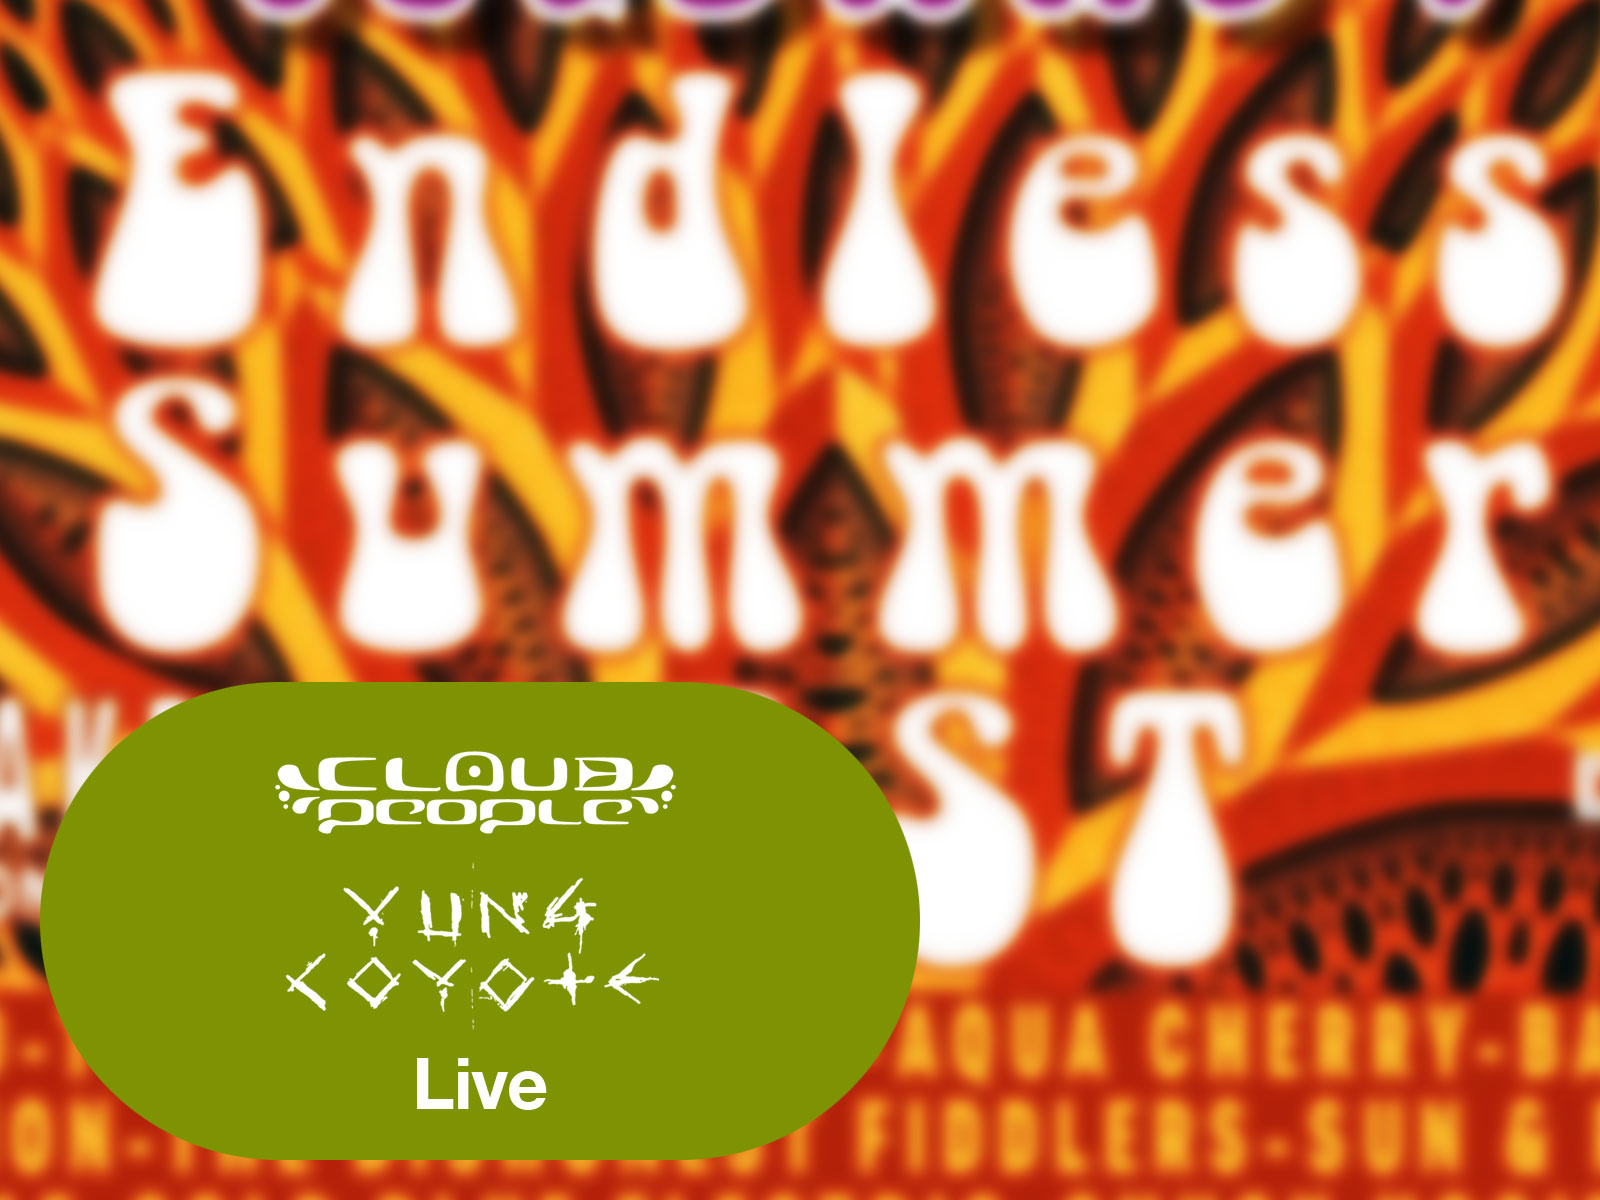 Cloud People, Yung Coyote perform at Endless Summer Fest 2019